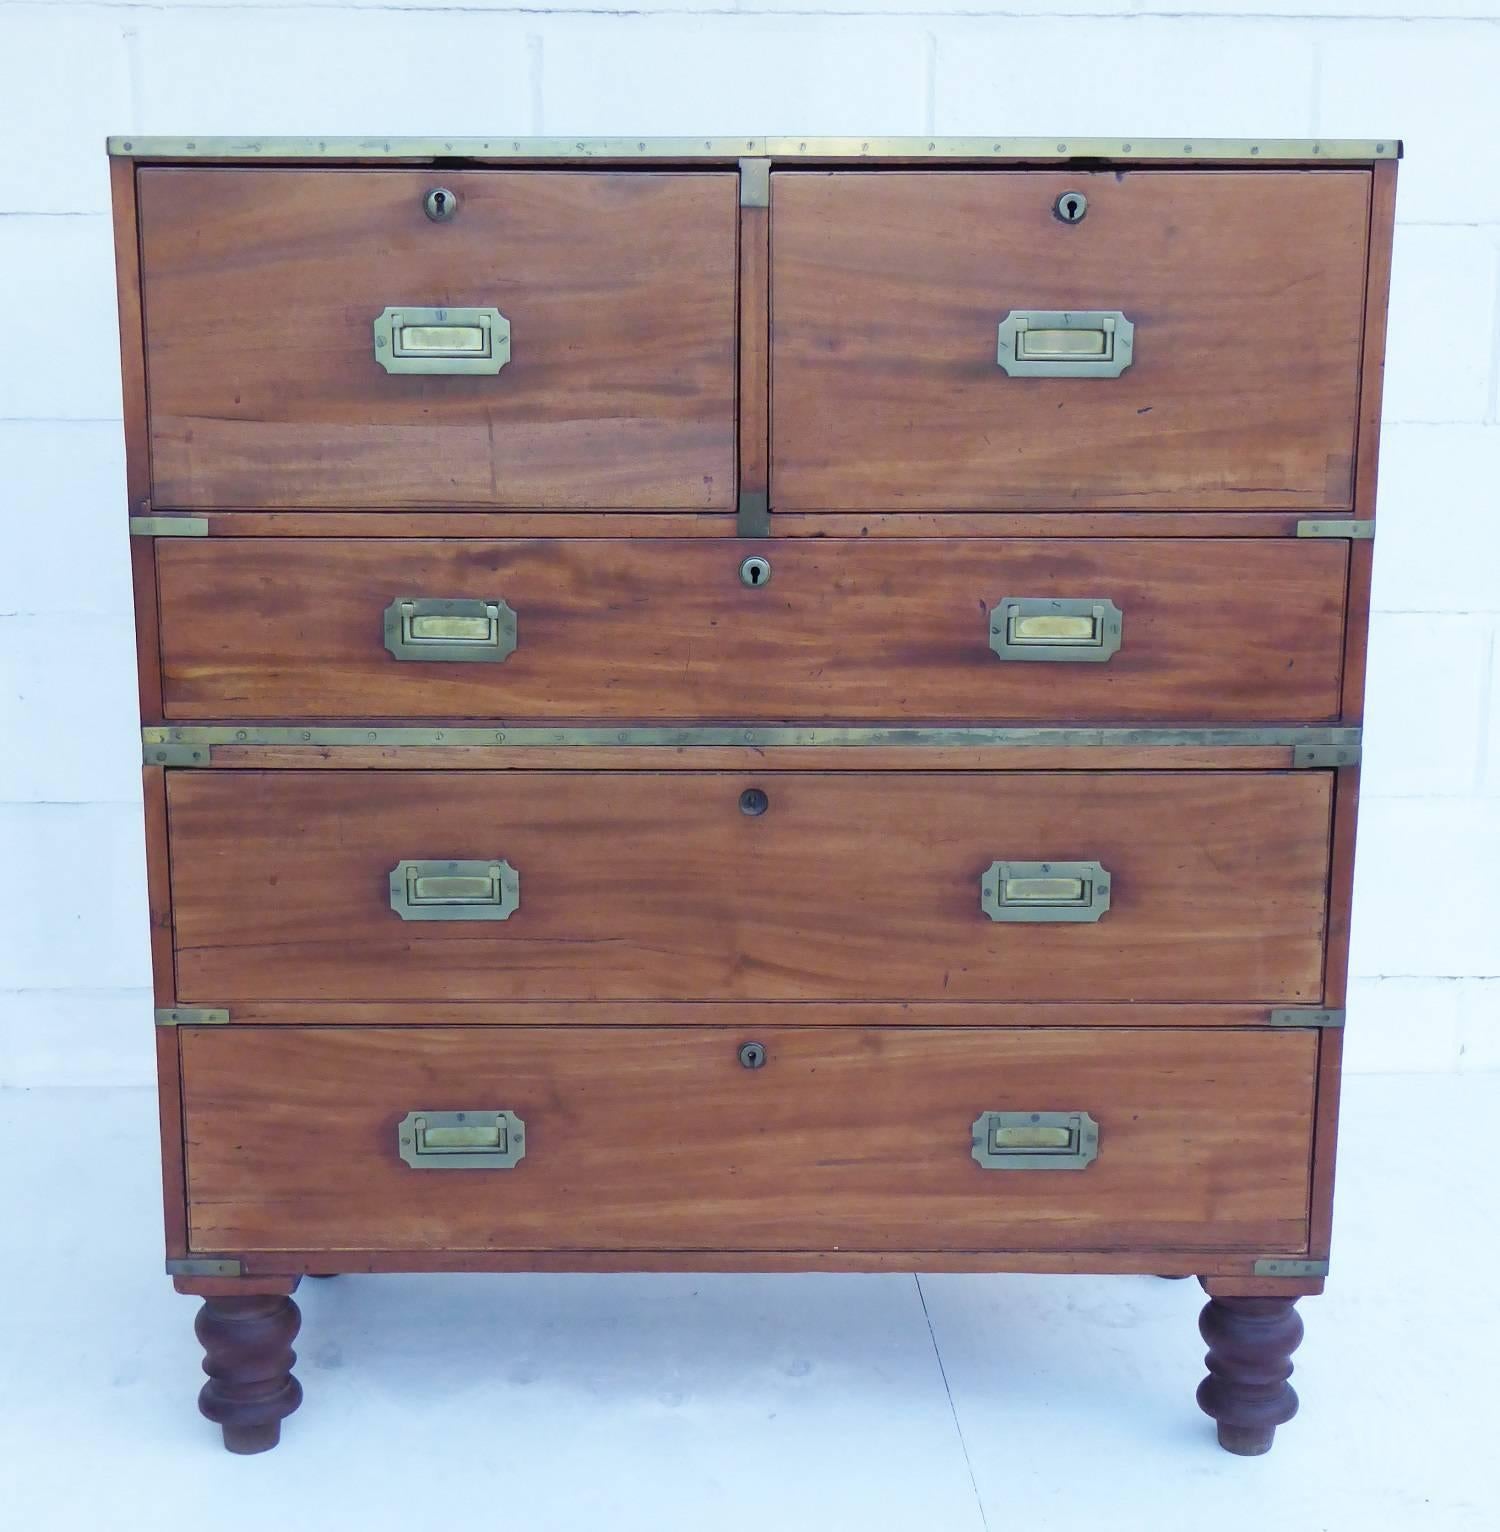 For sale is a good quality 19th century Mahogany Campaign Chest. The top half of the chest has two large drawers, above one long drawer, each with brass handles. The bottom half of the chest has a further two long drawers with matching brass